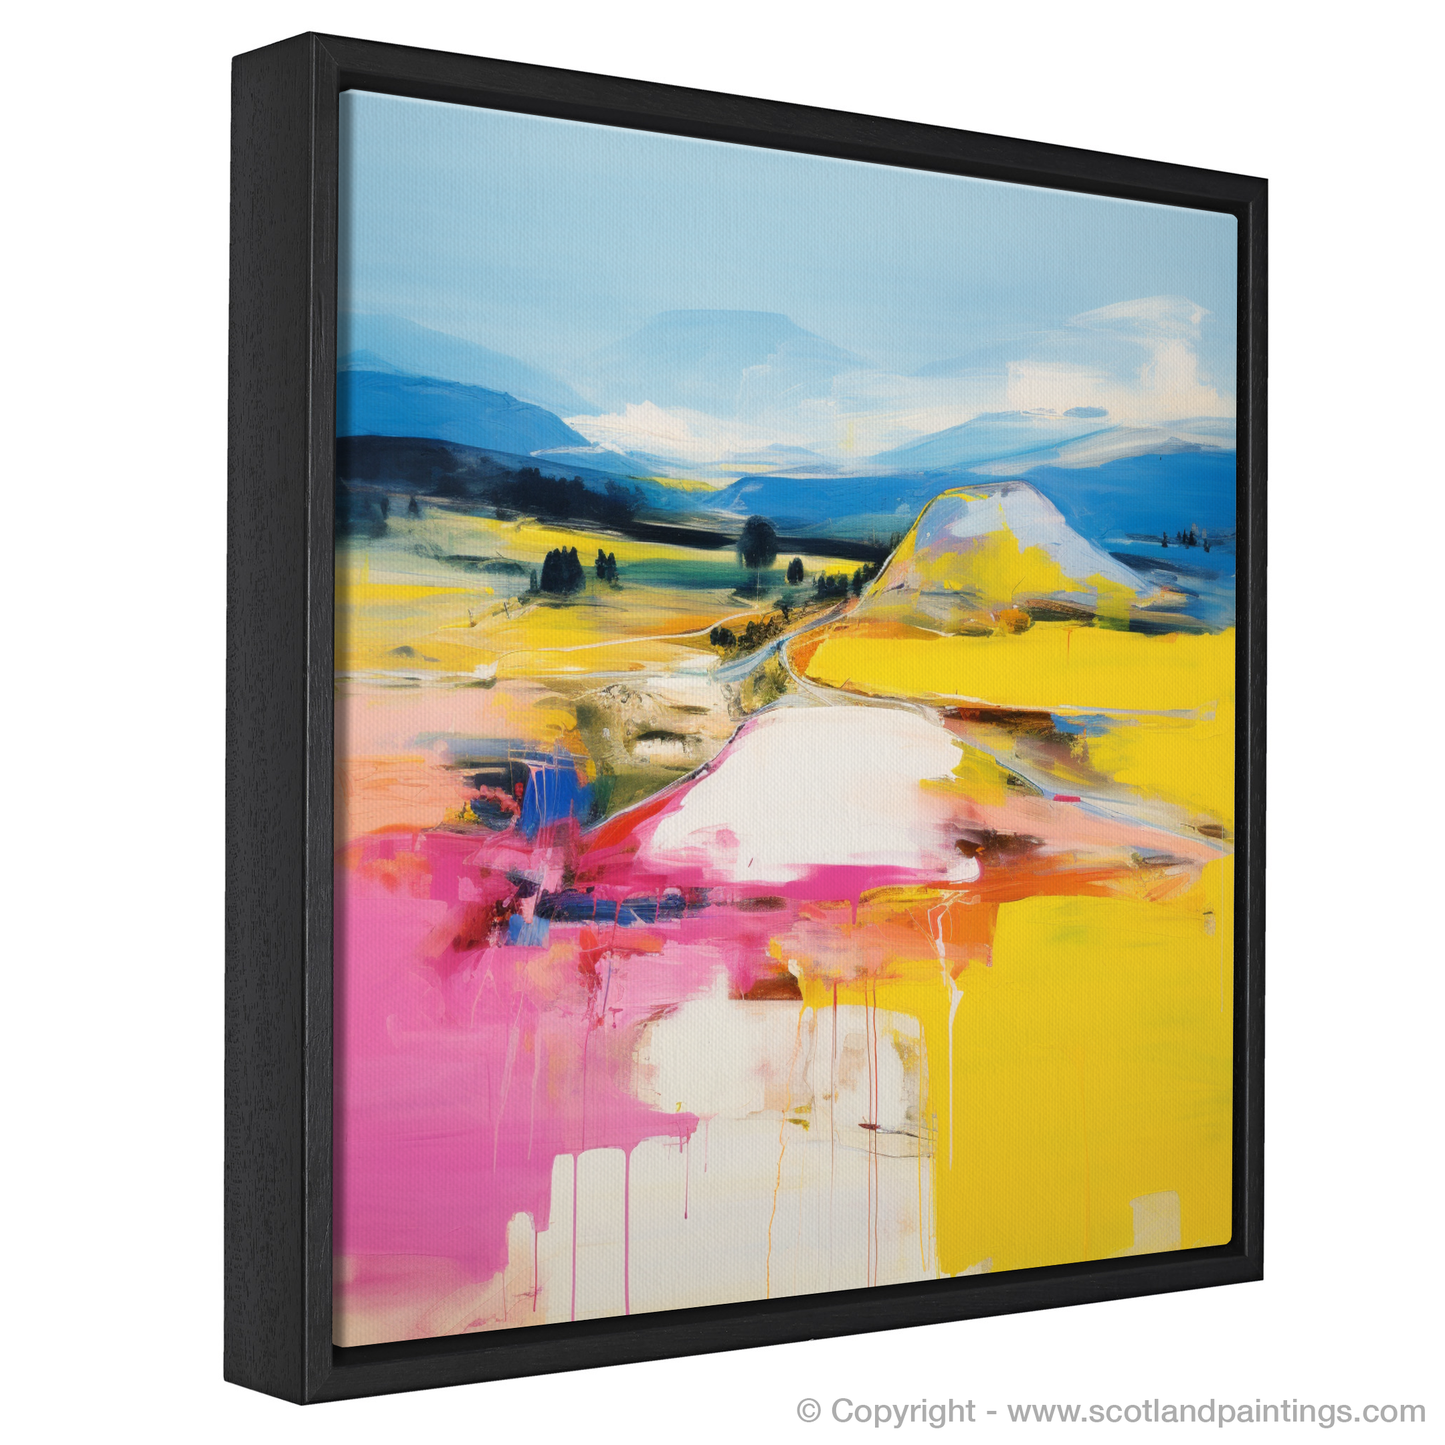 Painting and Art Print of Glenlivet, Moray in summer entitled "Summer Vibrance of Glenlivet Moray".